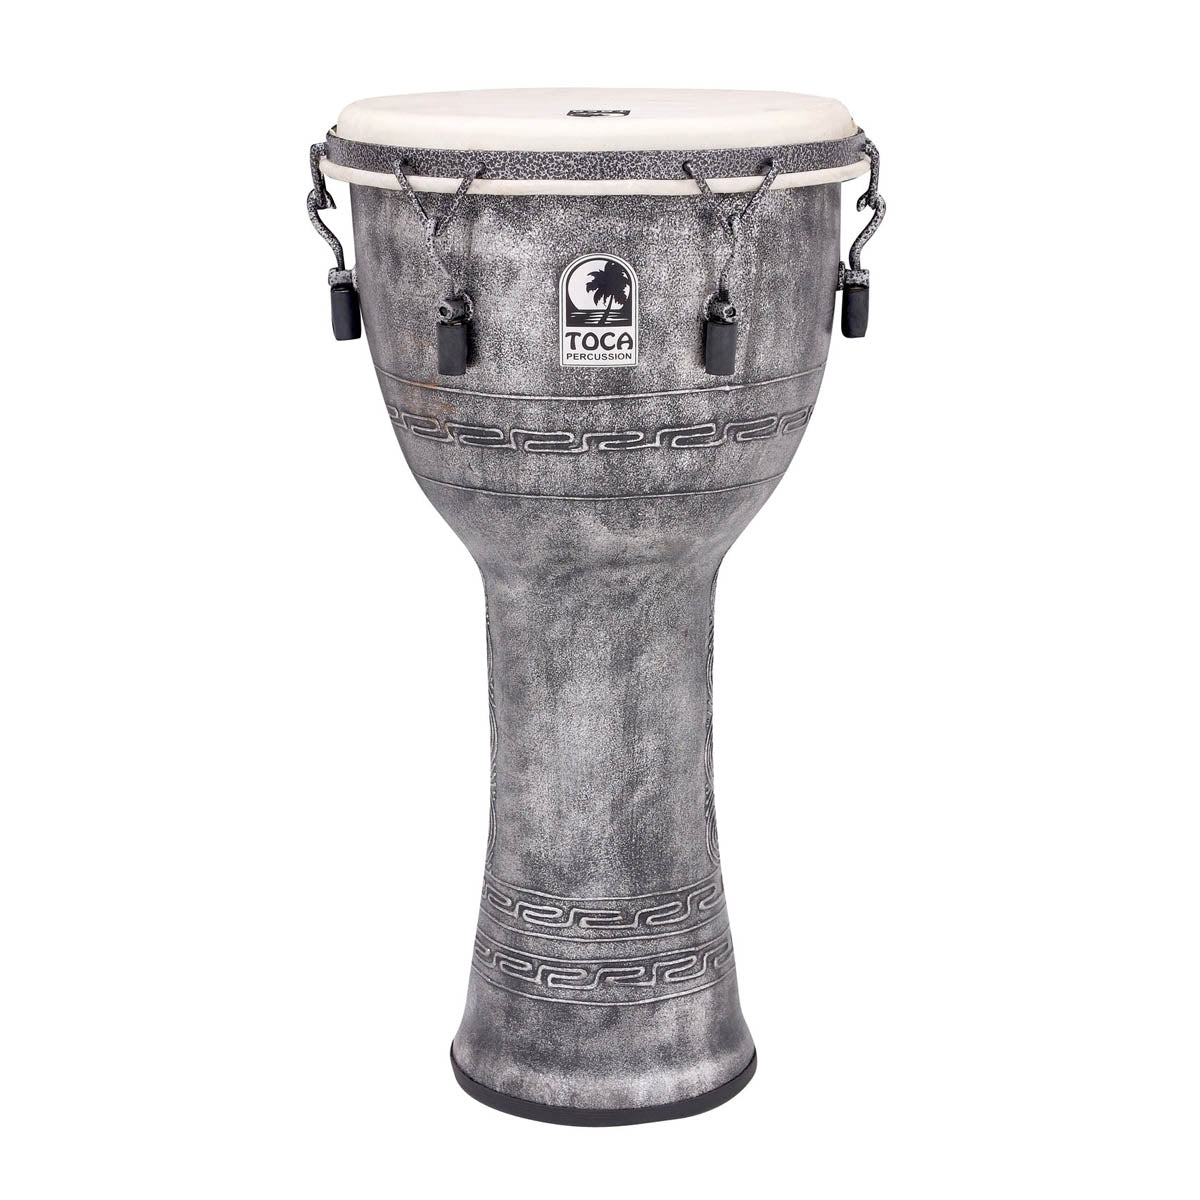 Toca Freestyle Mechanically Tuned 12’’ Djembe in Antique Silver